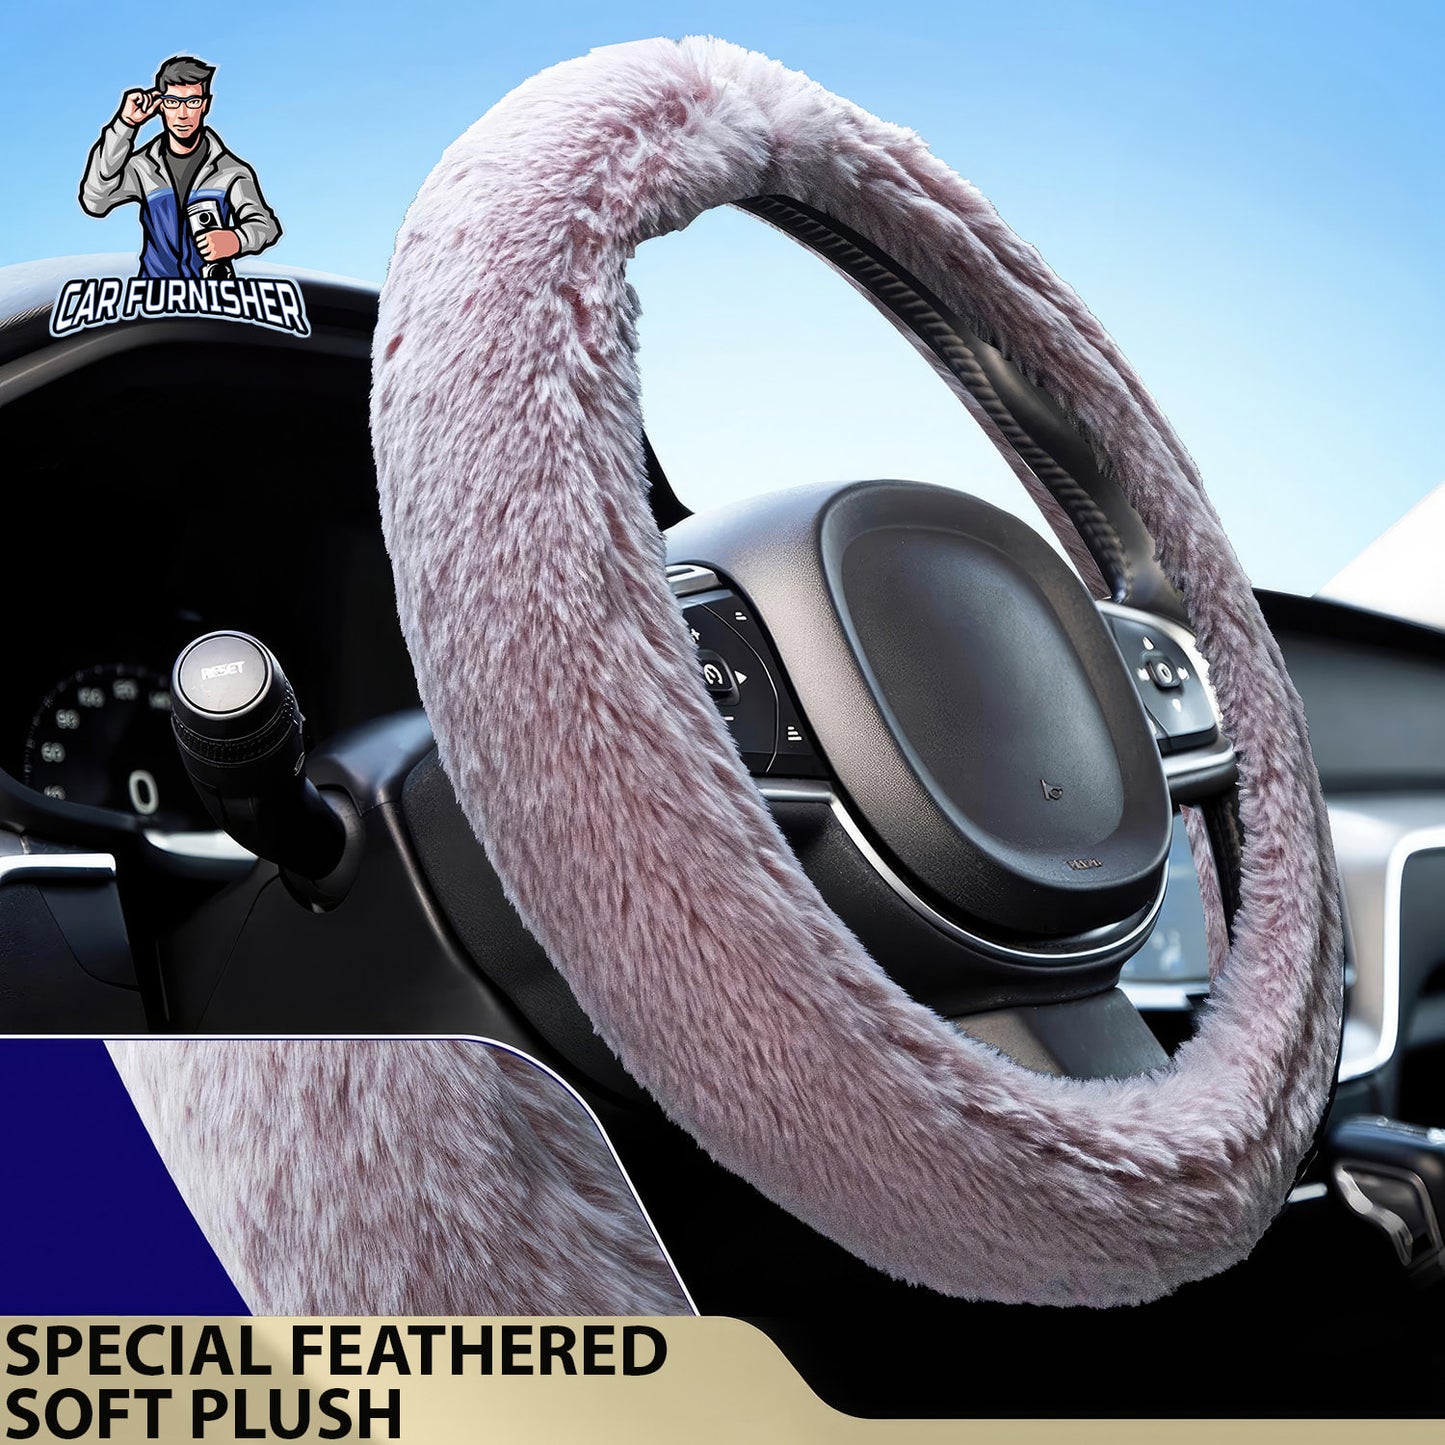 Steering Wheel Cover - Furry Plush Rose Gold Fabric